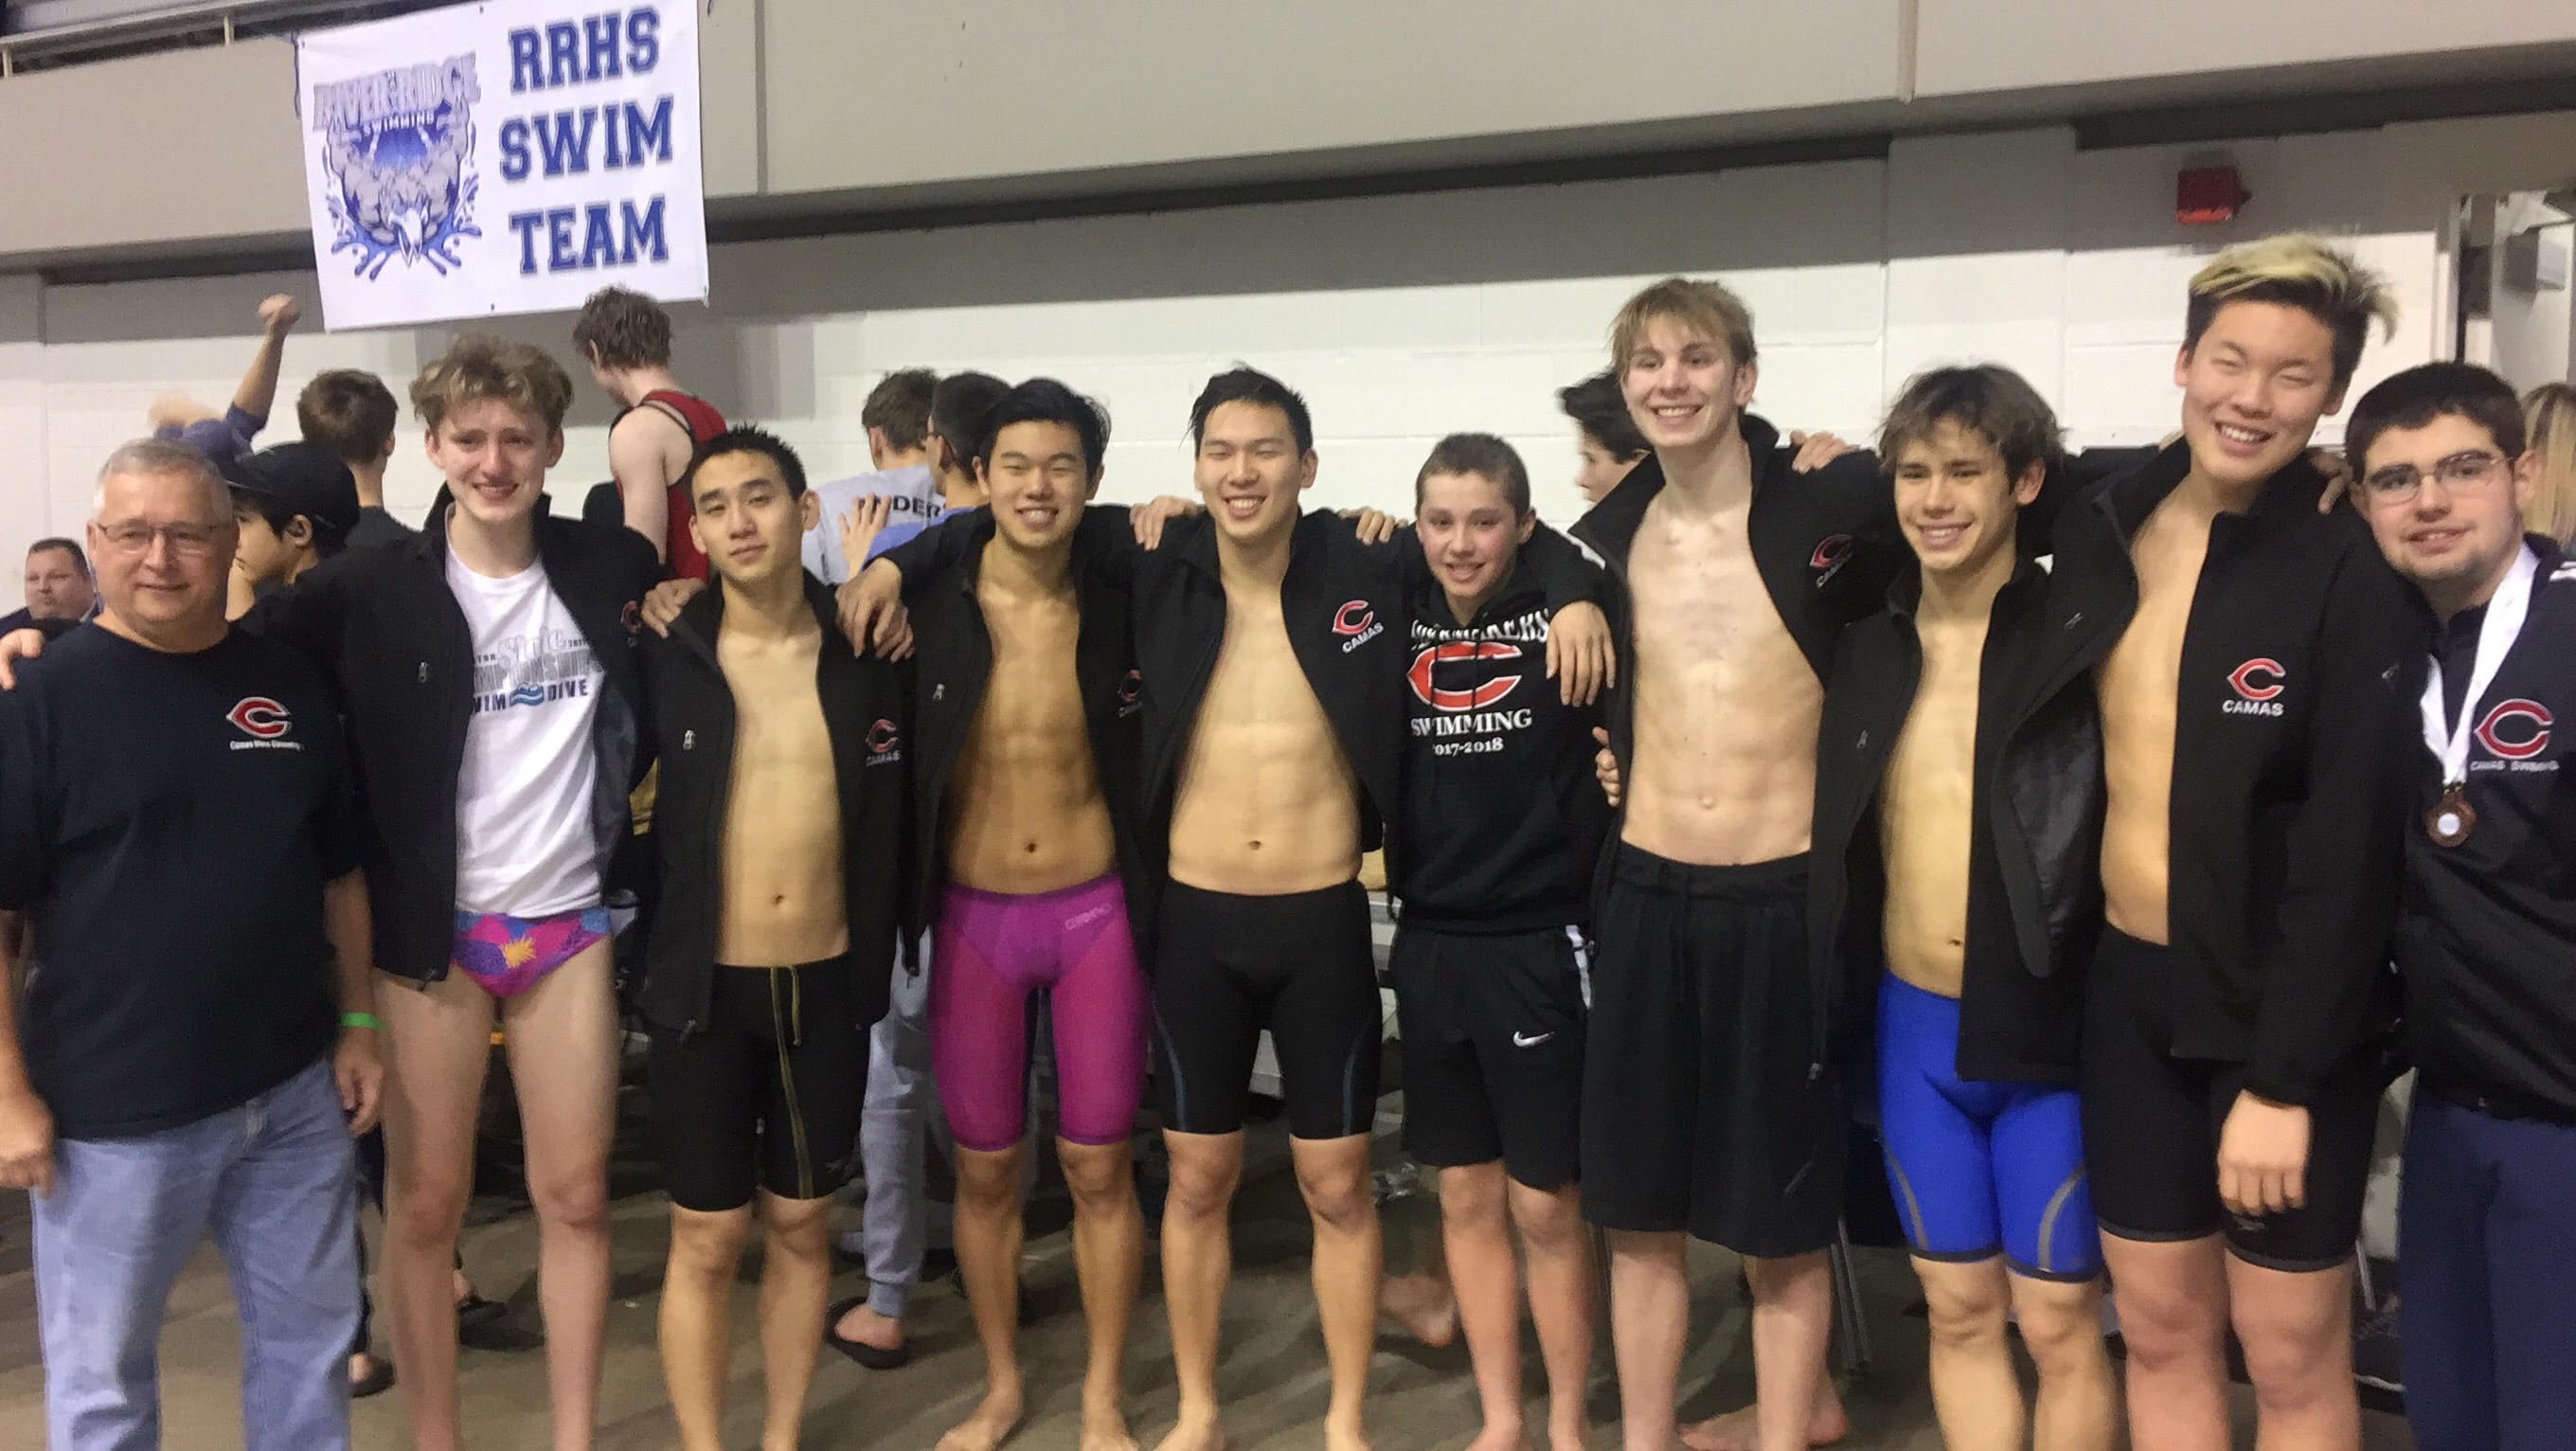 Camas swimmers post on deck after winning back-to-back 4A state boys swimming team titles on Saturday, Feb. 17, 2018 at Federal Way.